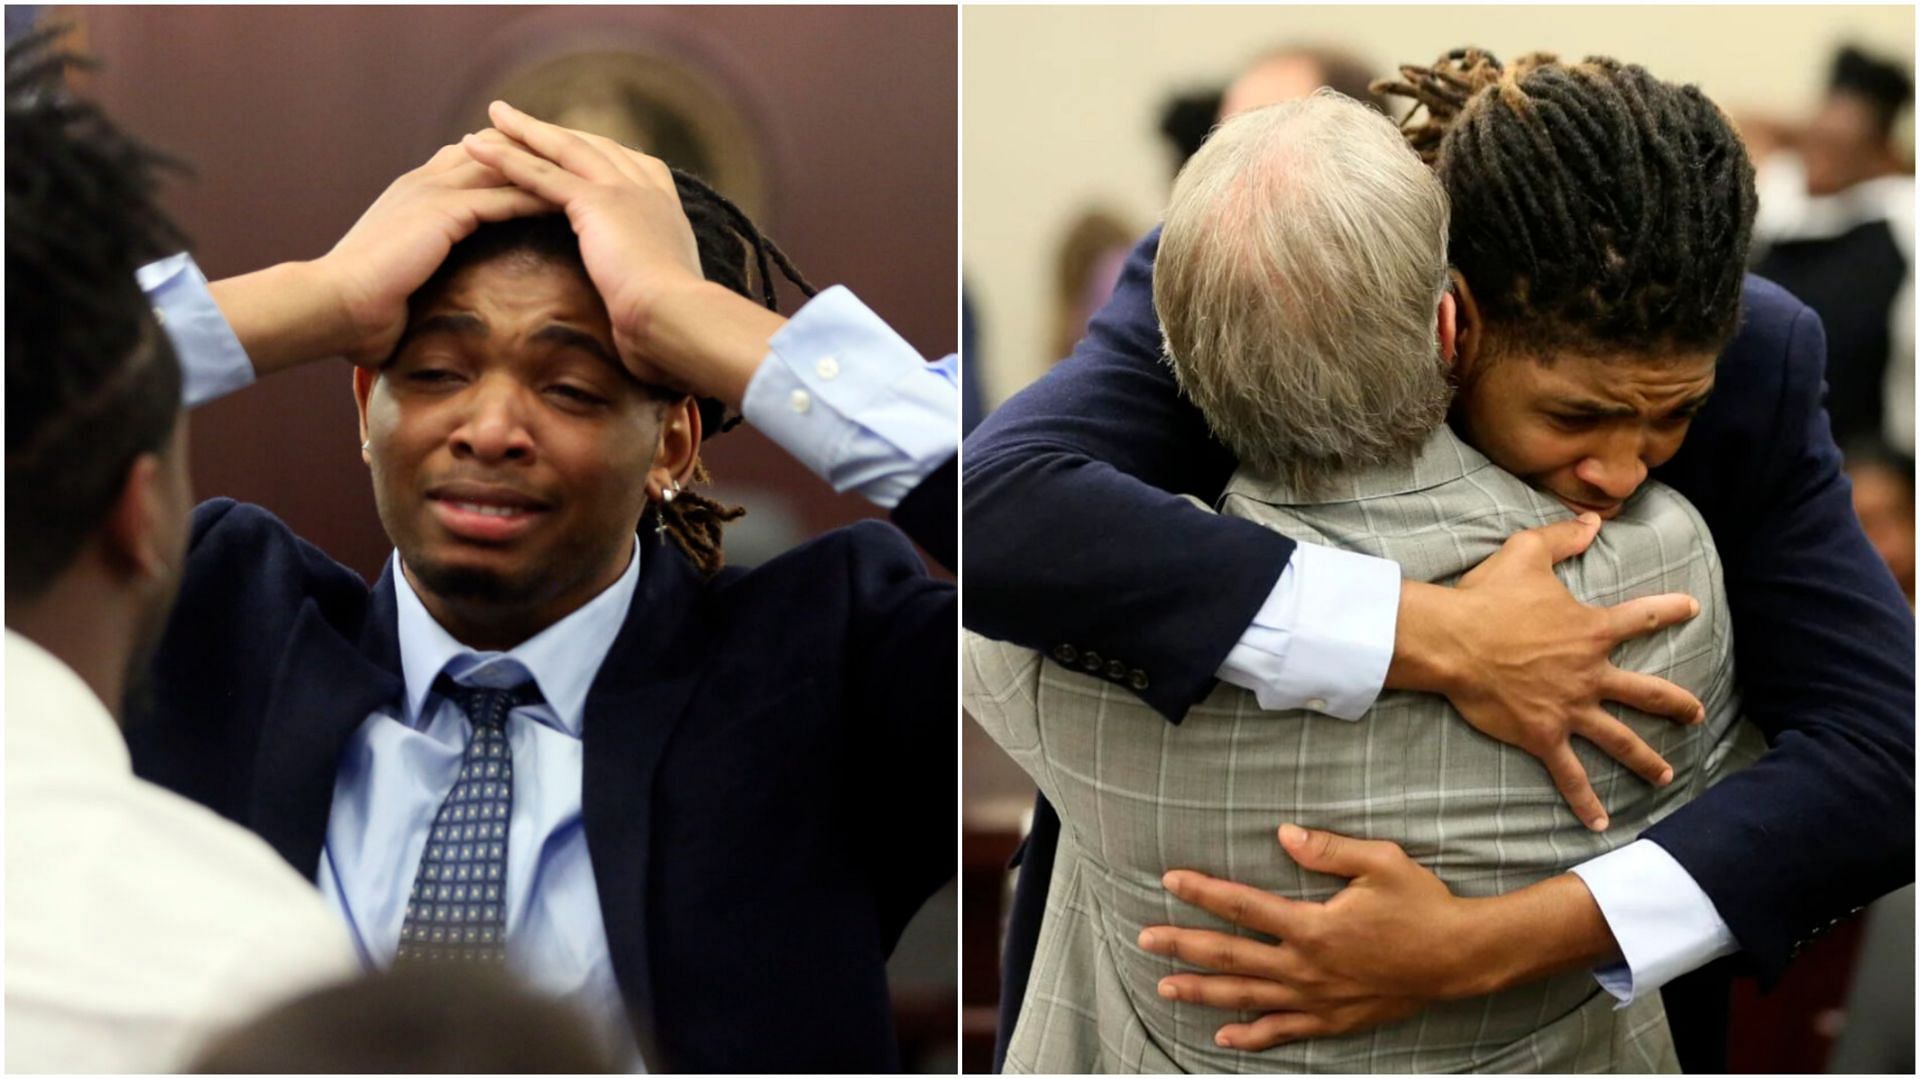 Isimemen Etute, a former footballer, is now a free man and acquitted of charges in the 2021 Jerry Smith murder (Image via Twitter/Montgomery County Circuit Court)